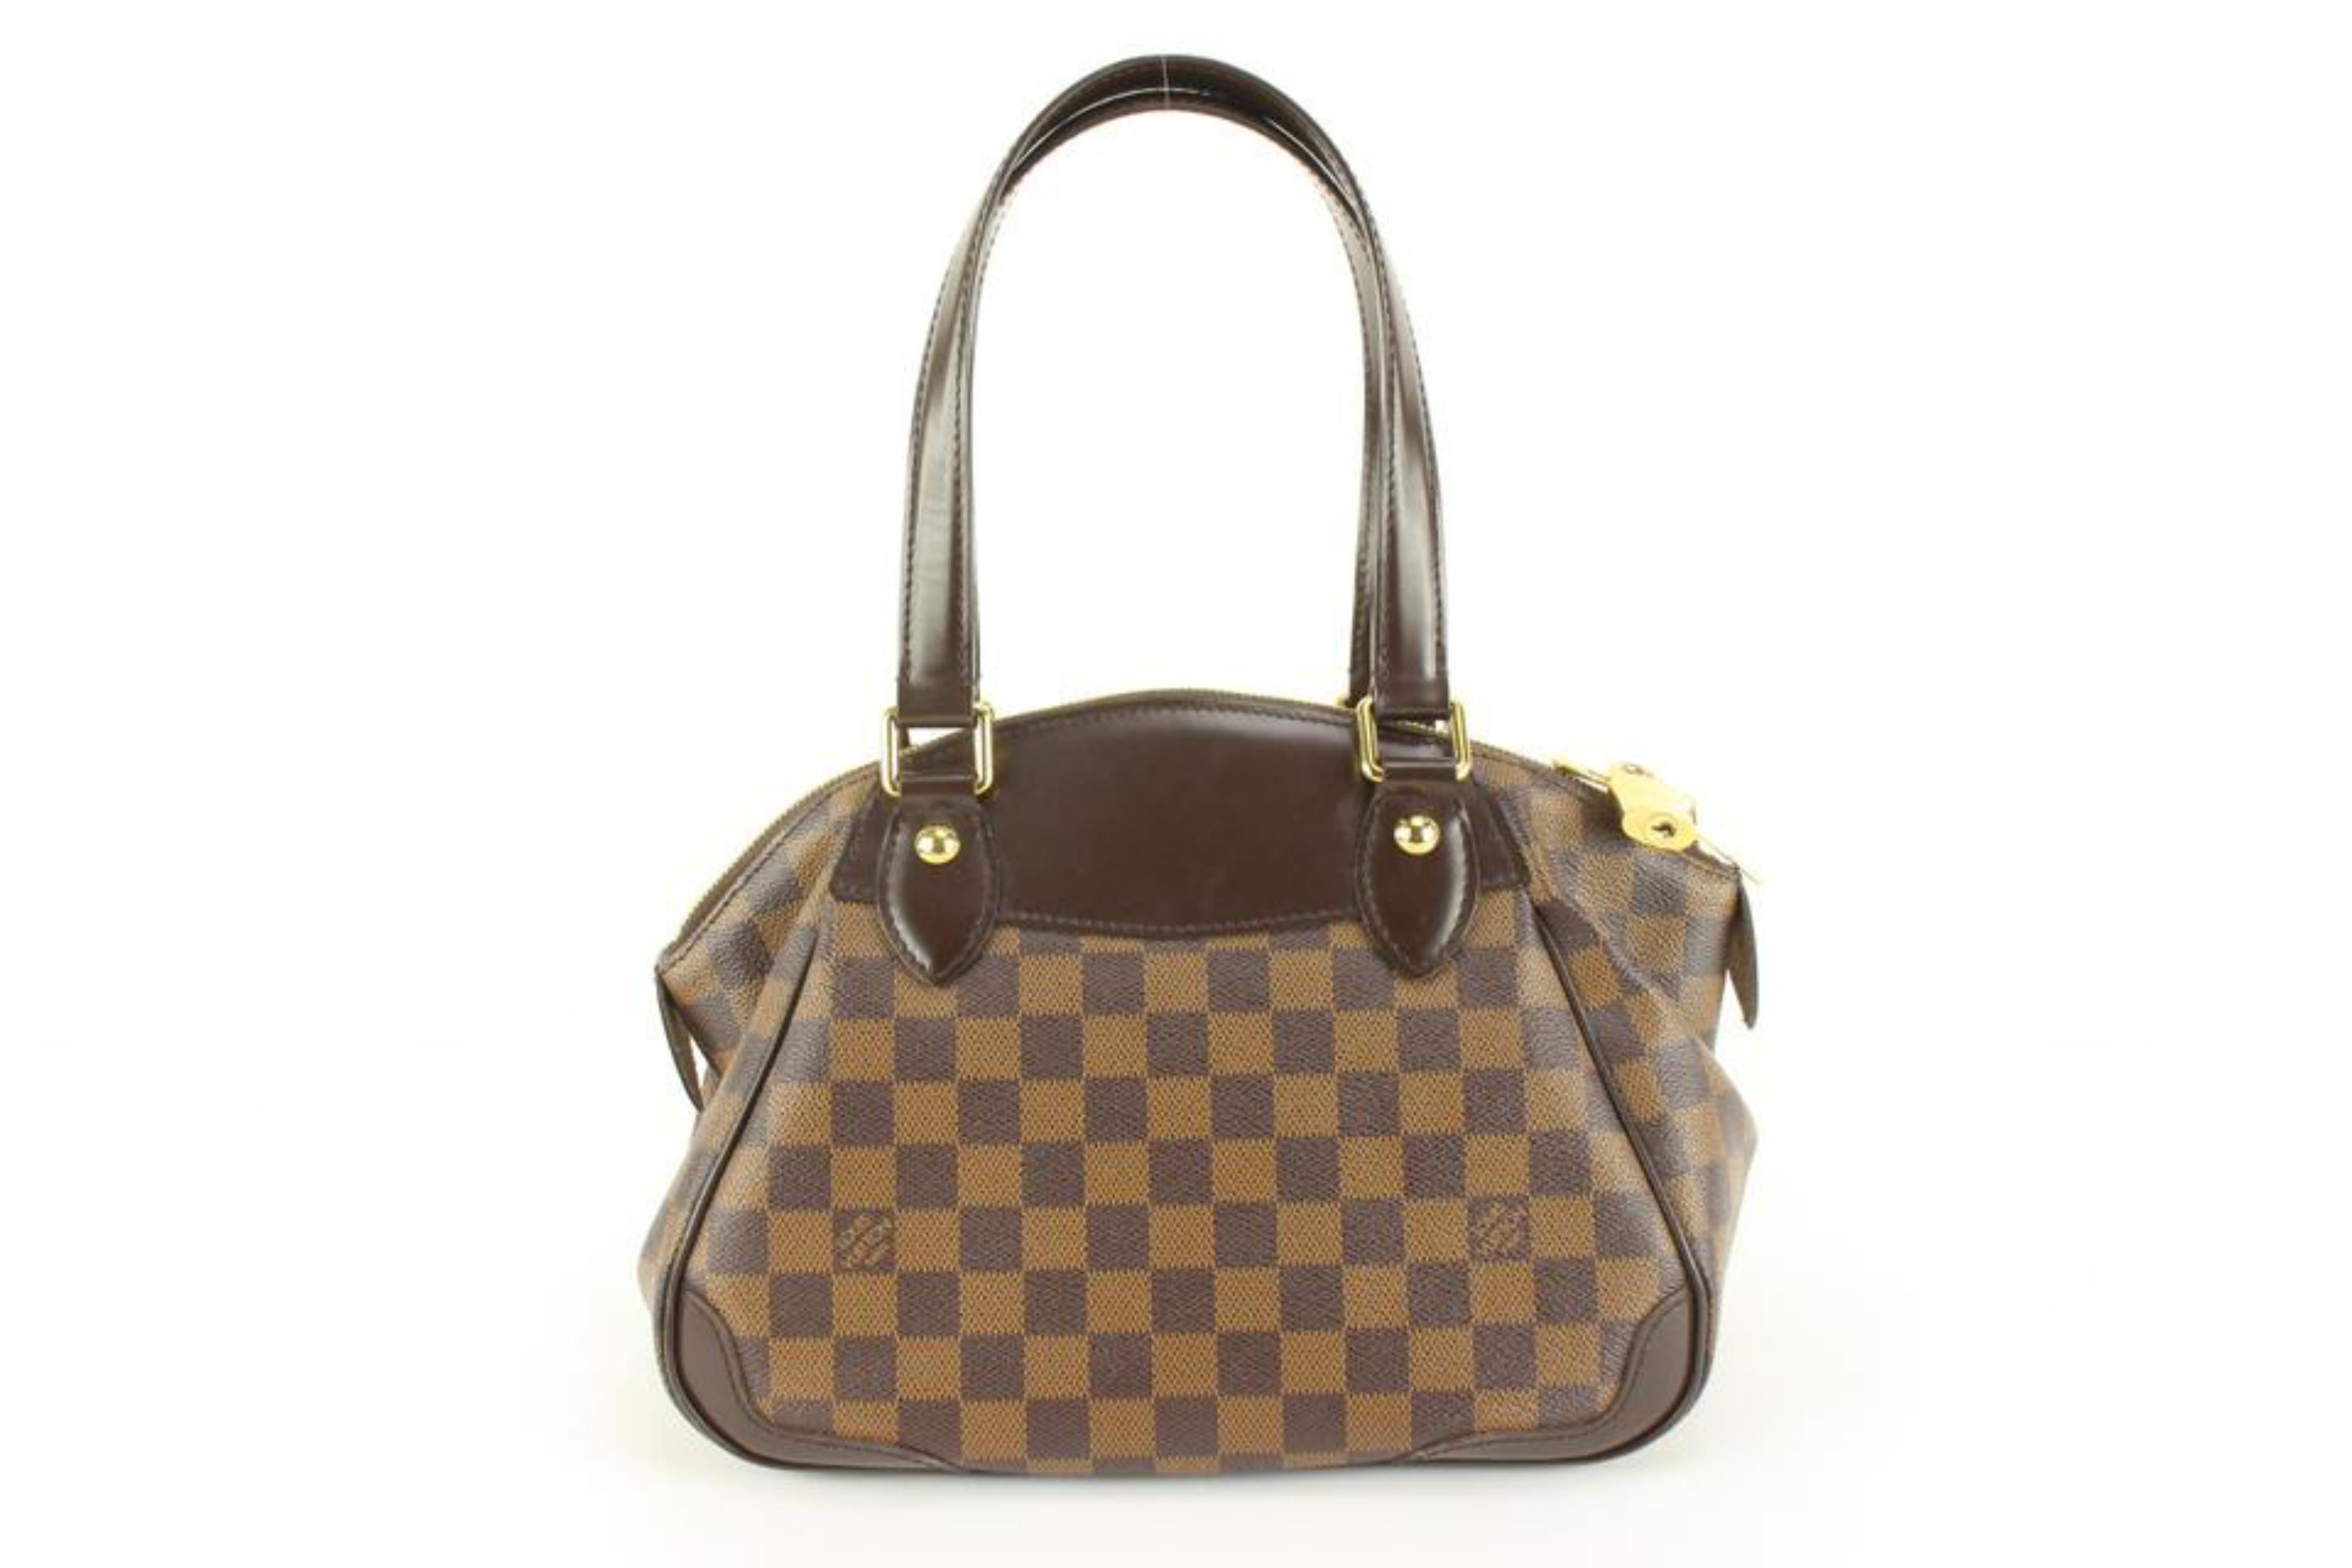 Louis Vuitton Discontinued Damier Ebene Verona PM Bowler Shoulder Bag 20lk53s In Good Condition For Sale In Dix hills, NY